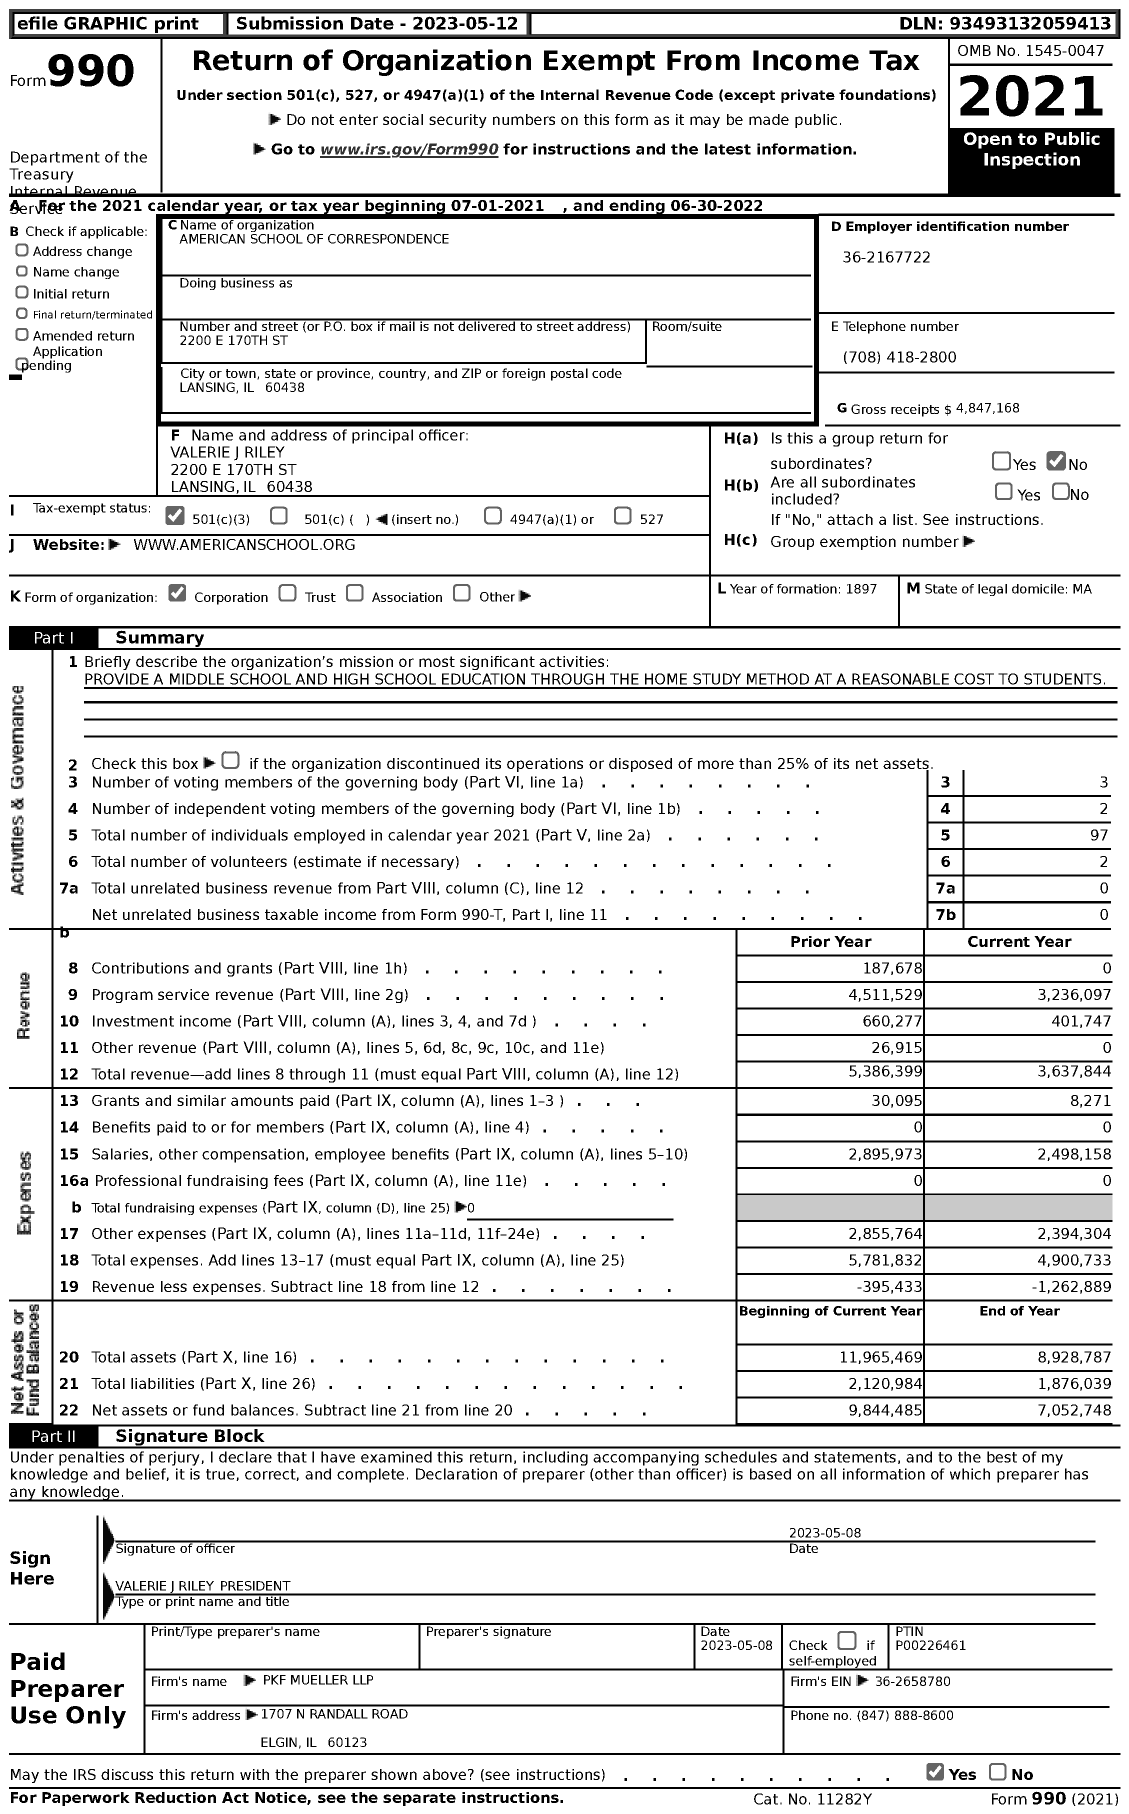 Image of first page of 2021 Form 990 for American School of Correspondence